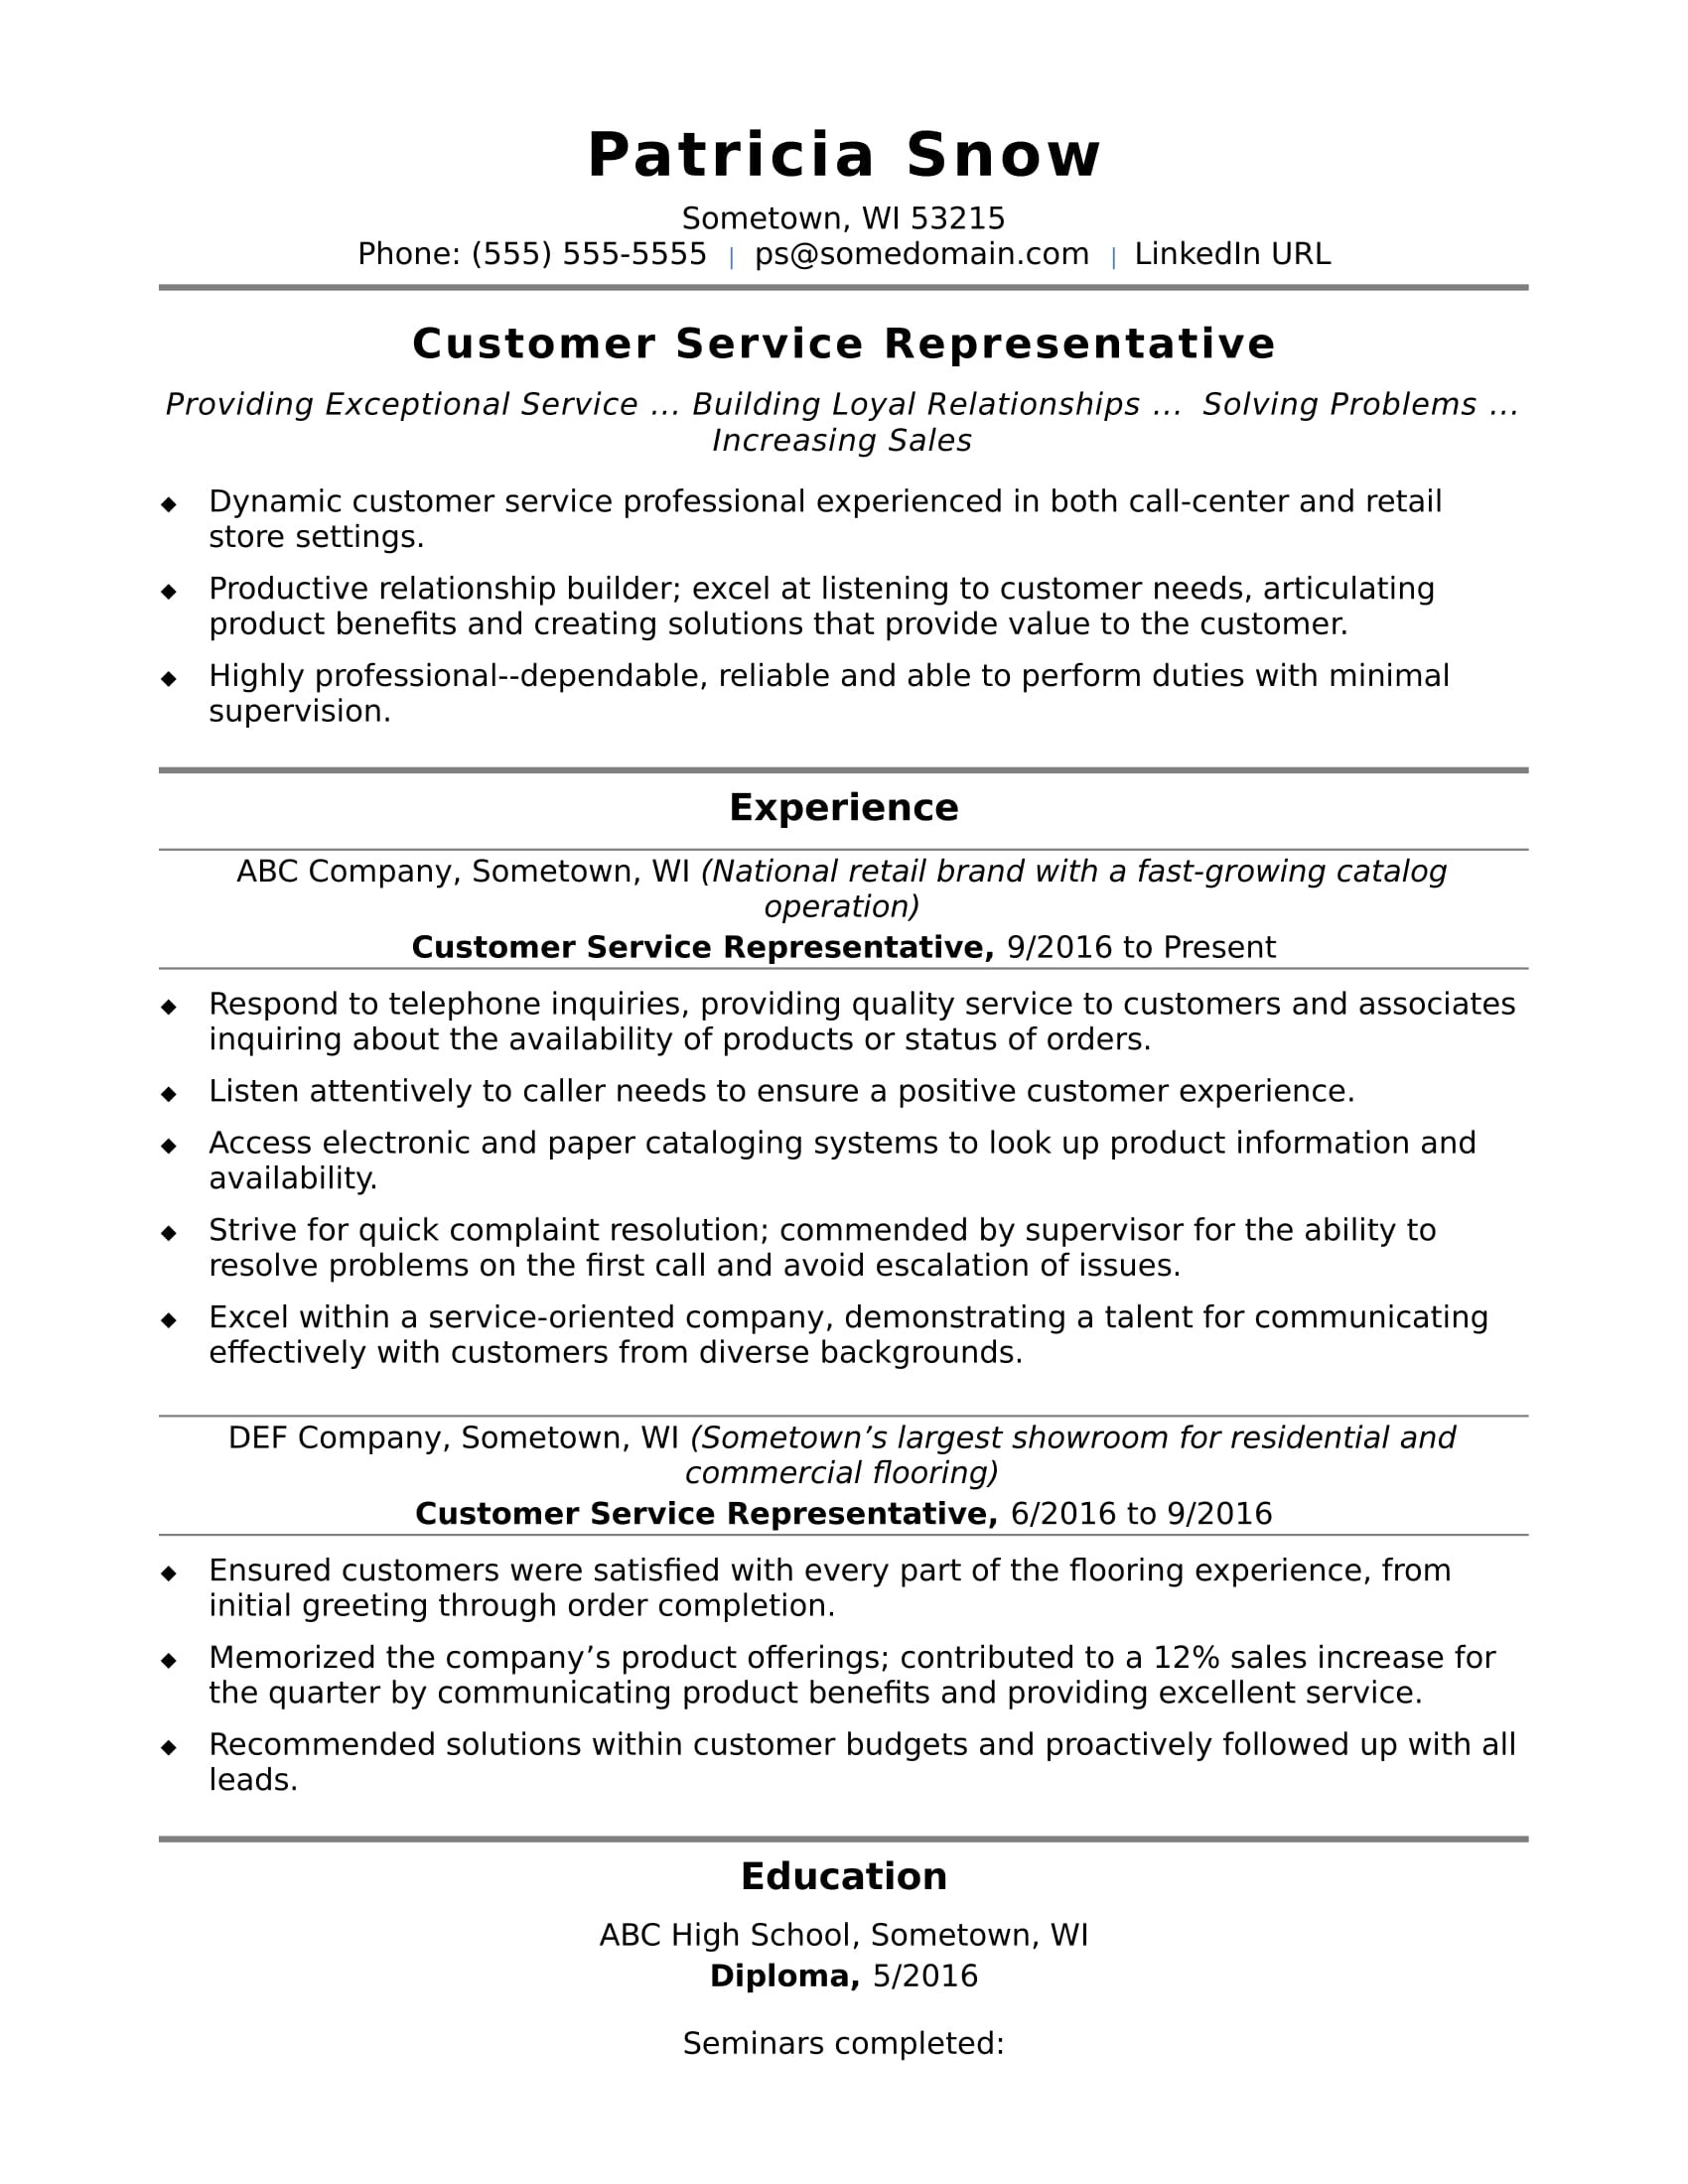 Find Sample Resumes for Customer Service Entry-level Customer Service Resume Sample Monster.com